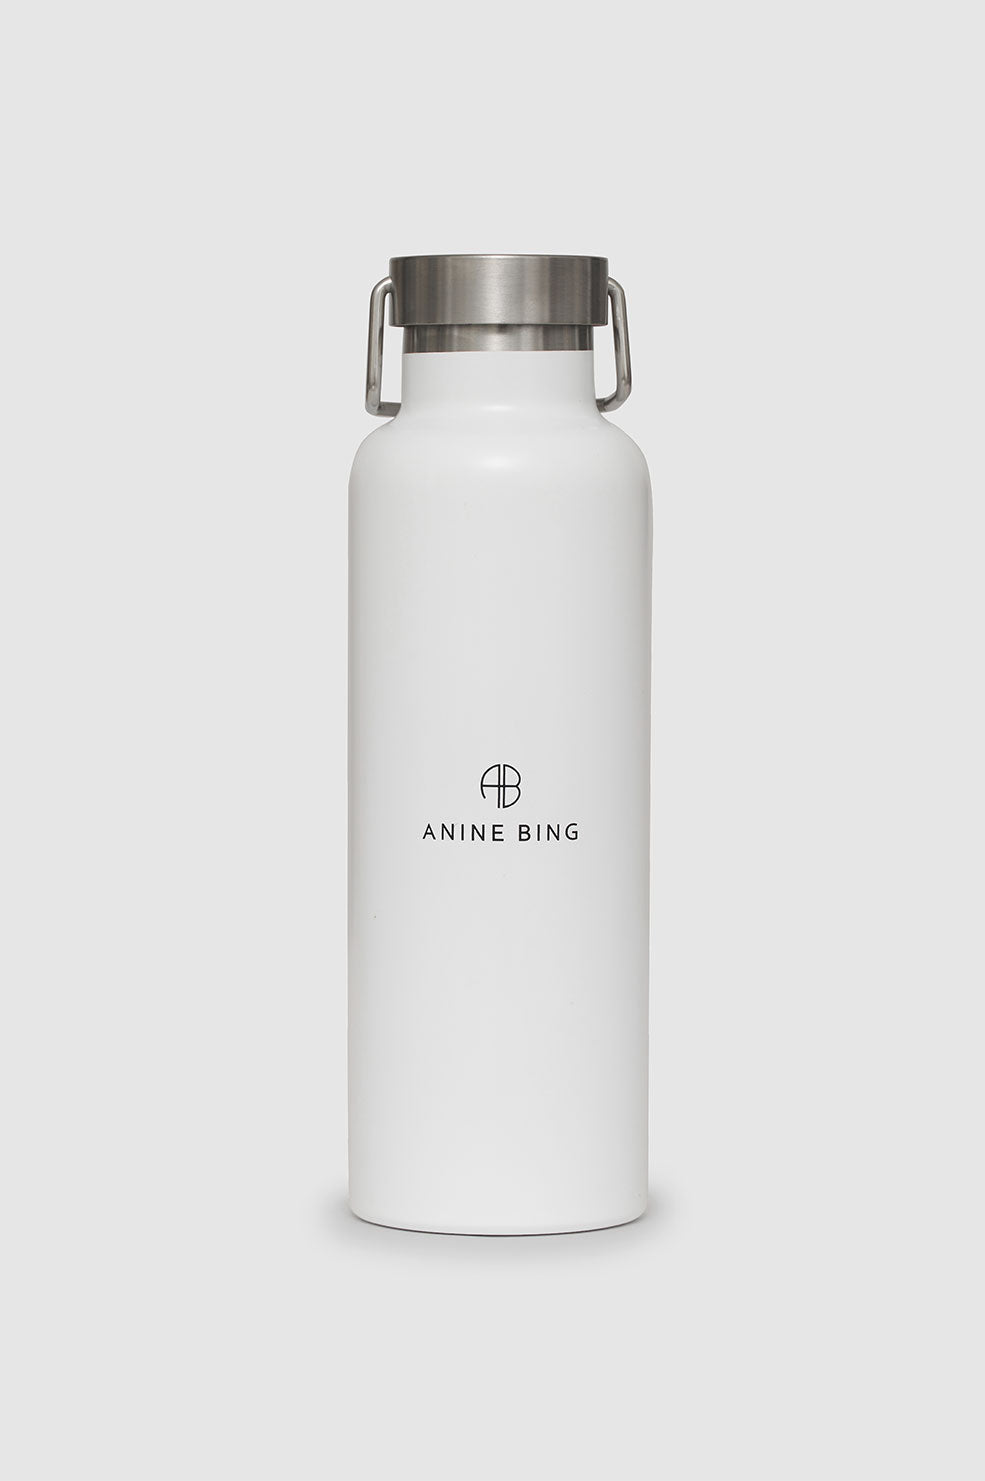 ANINE BING AB Water Bottle - White - Front View